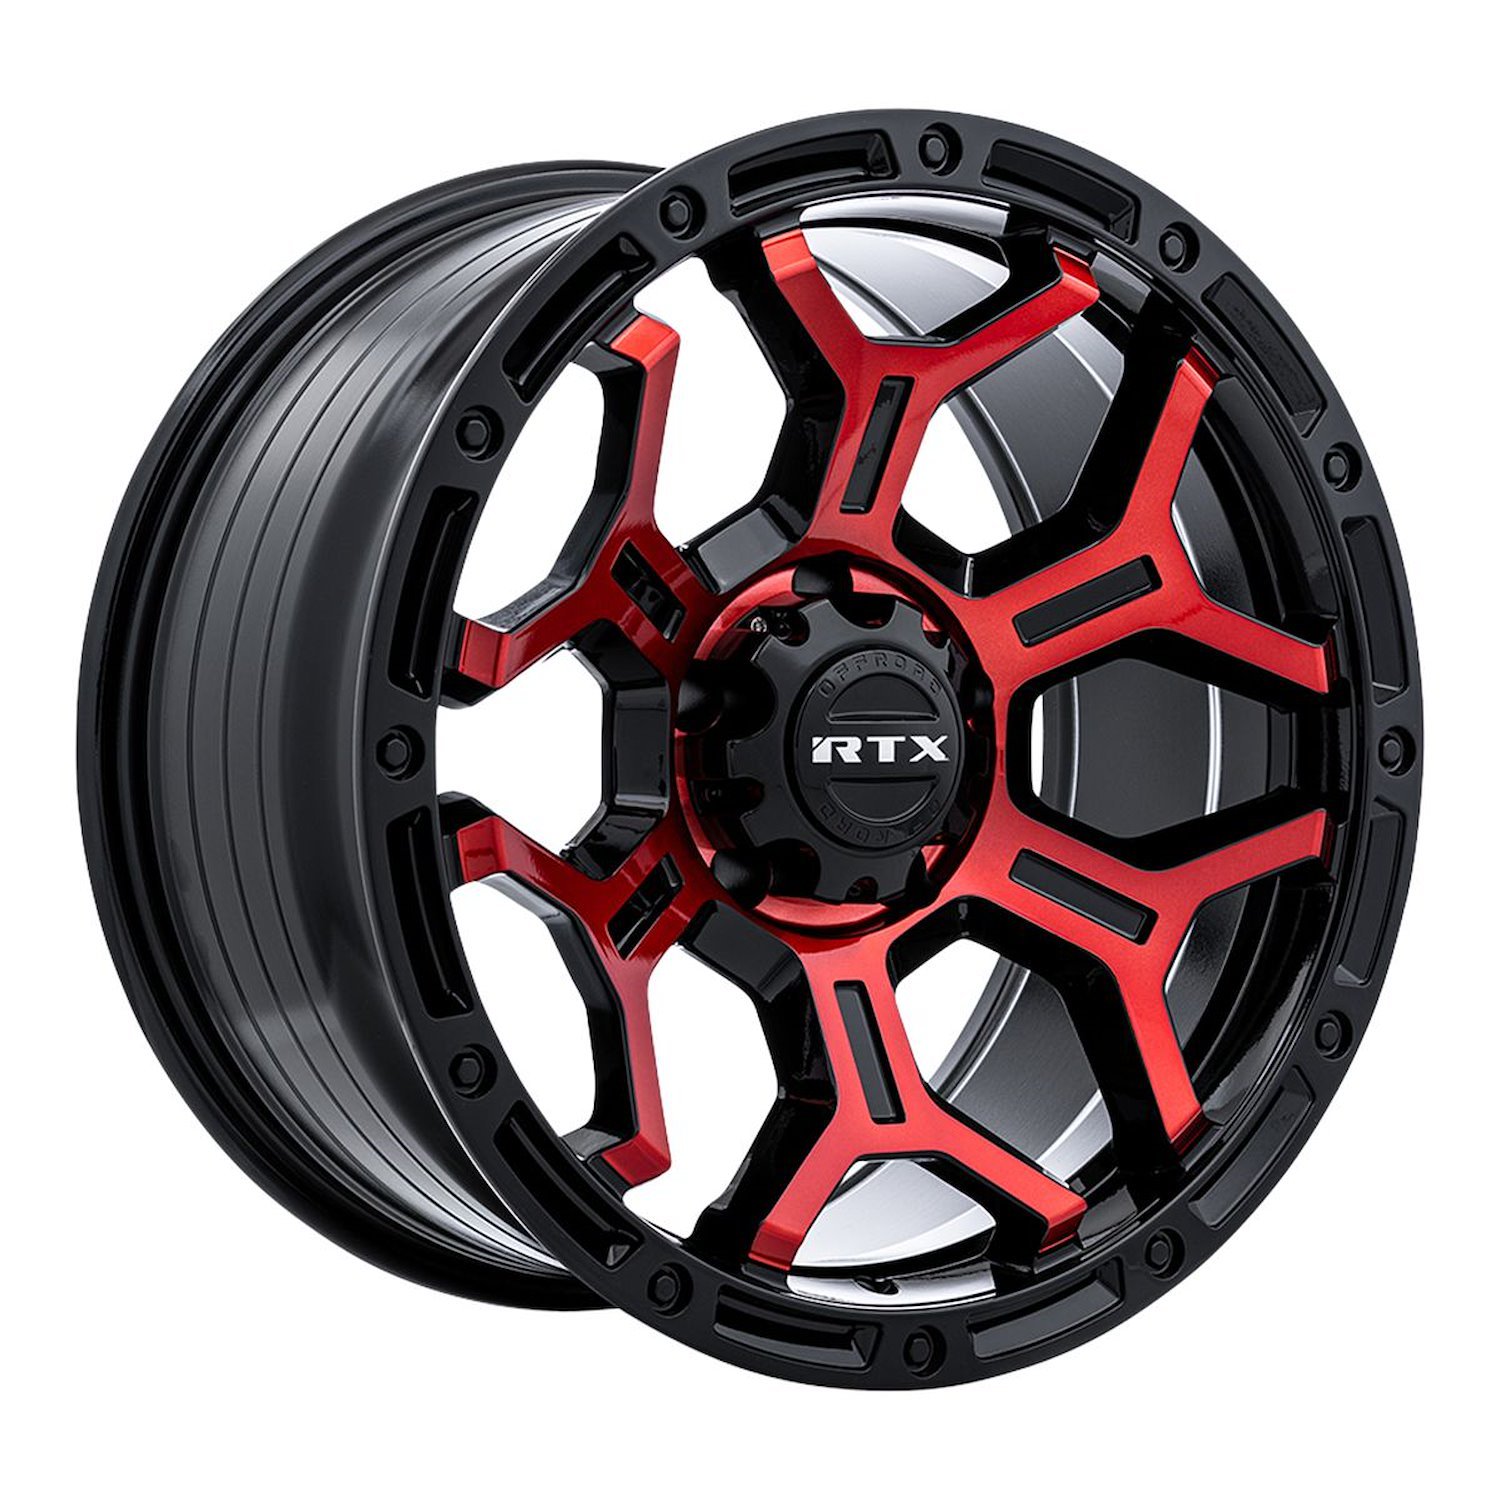 083103 Off-Road Series Goliath Wheel [Size: 17" x 9"] Gloss Black Machined Red Spokes Finish